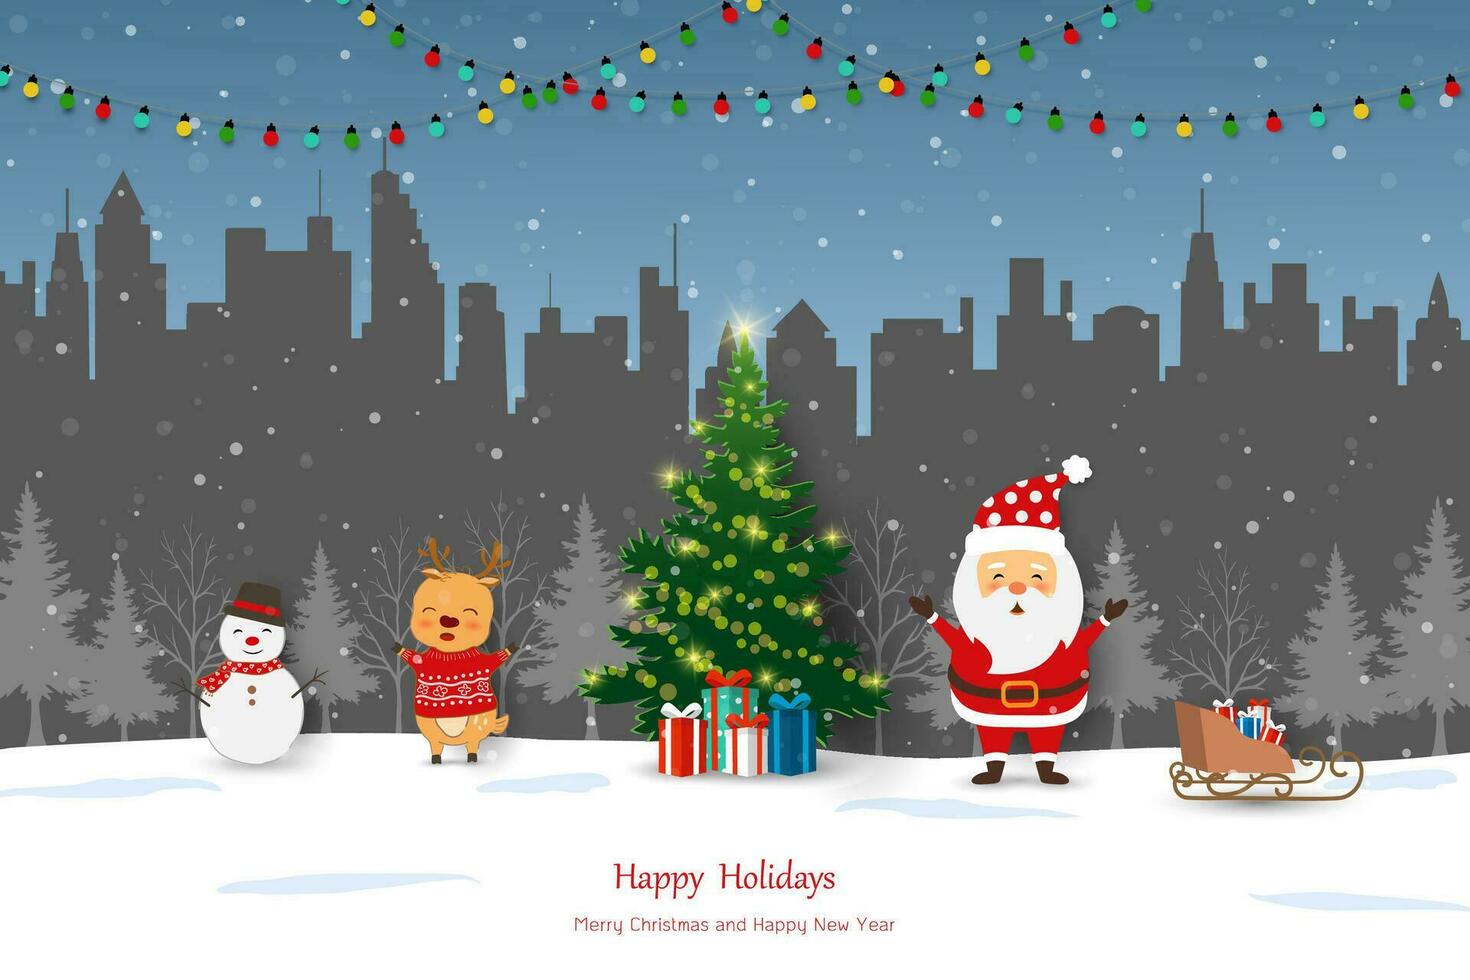 Merry Christmas and Happy new year greeting card,winter landscape with Santa Claus celebrate party on city background vector